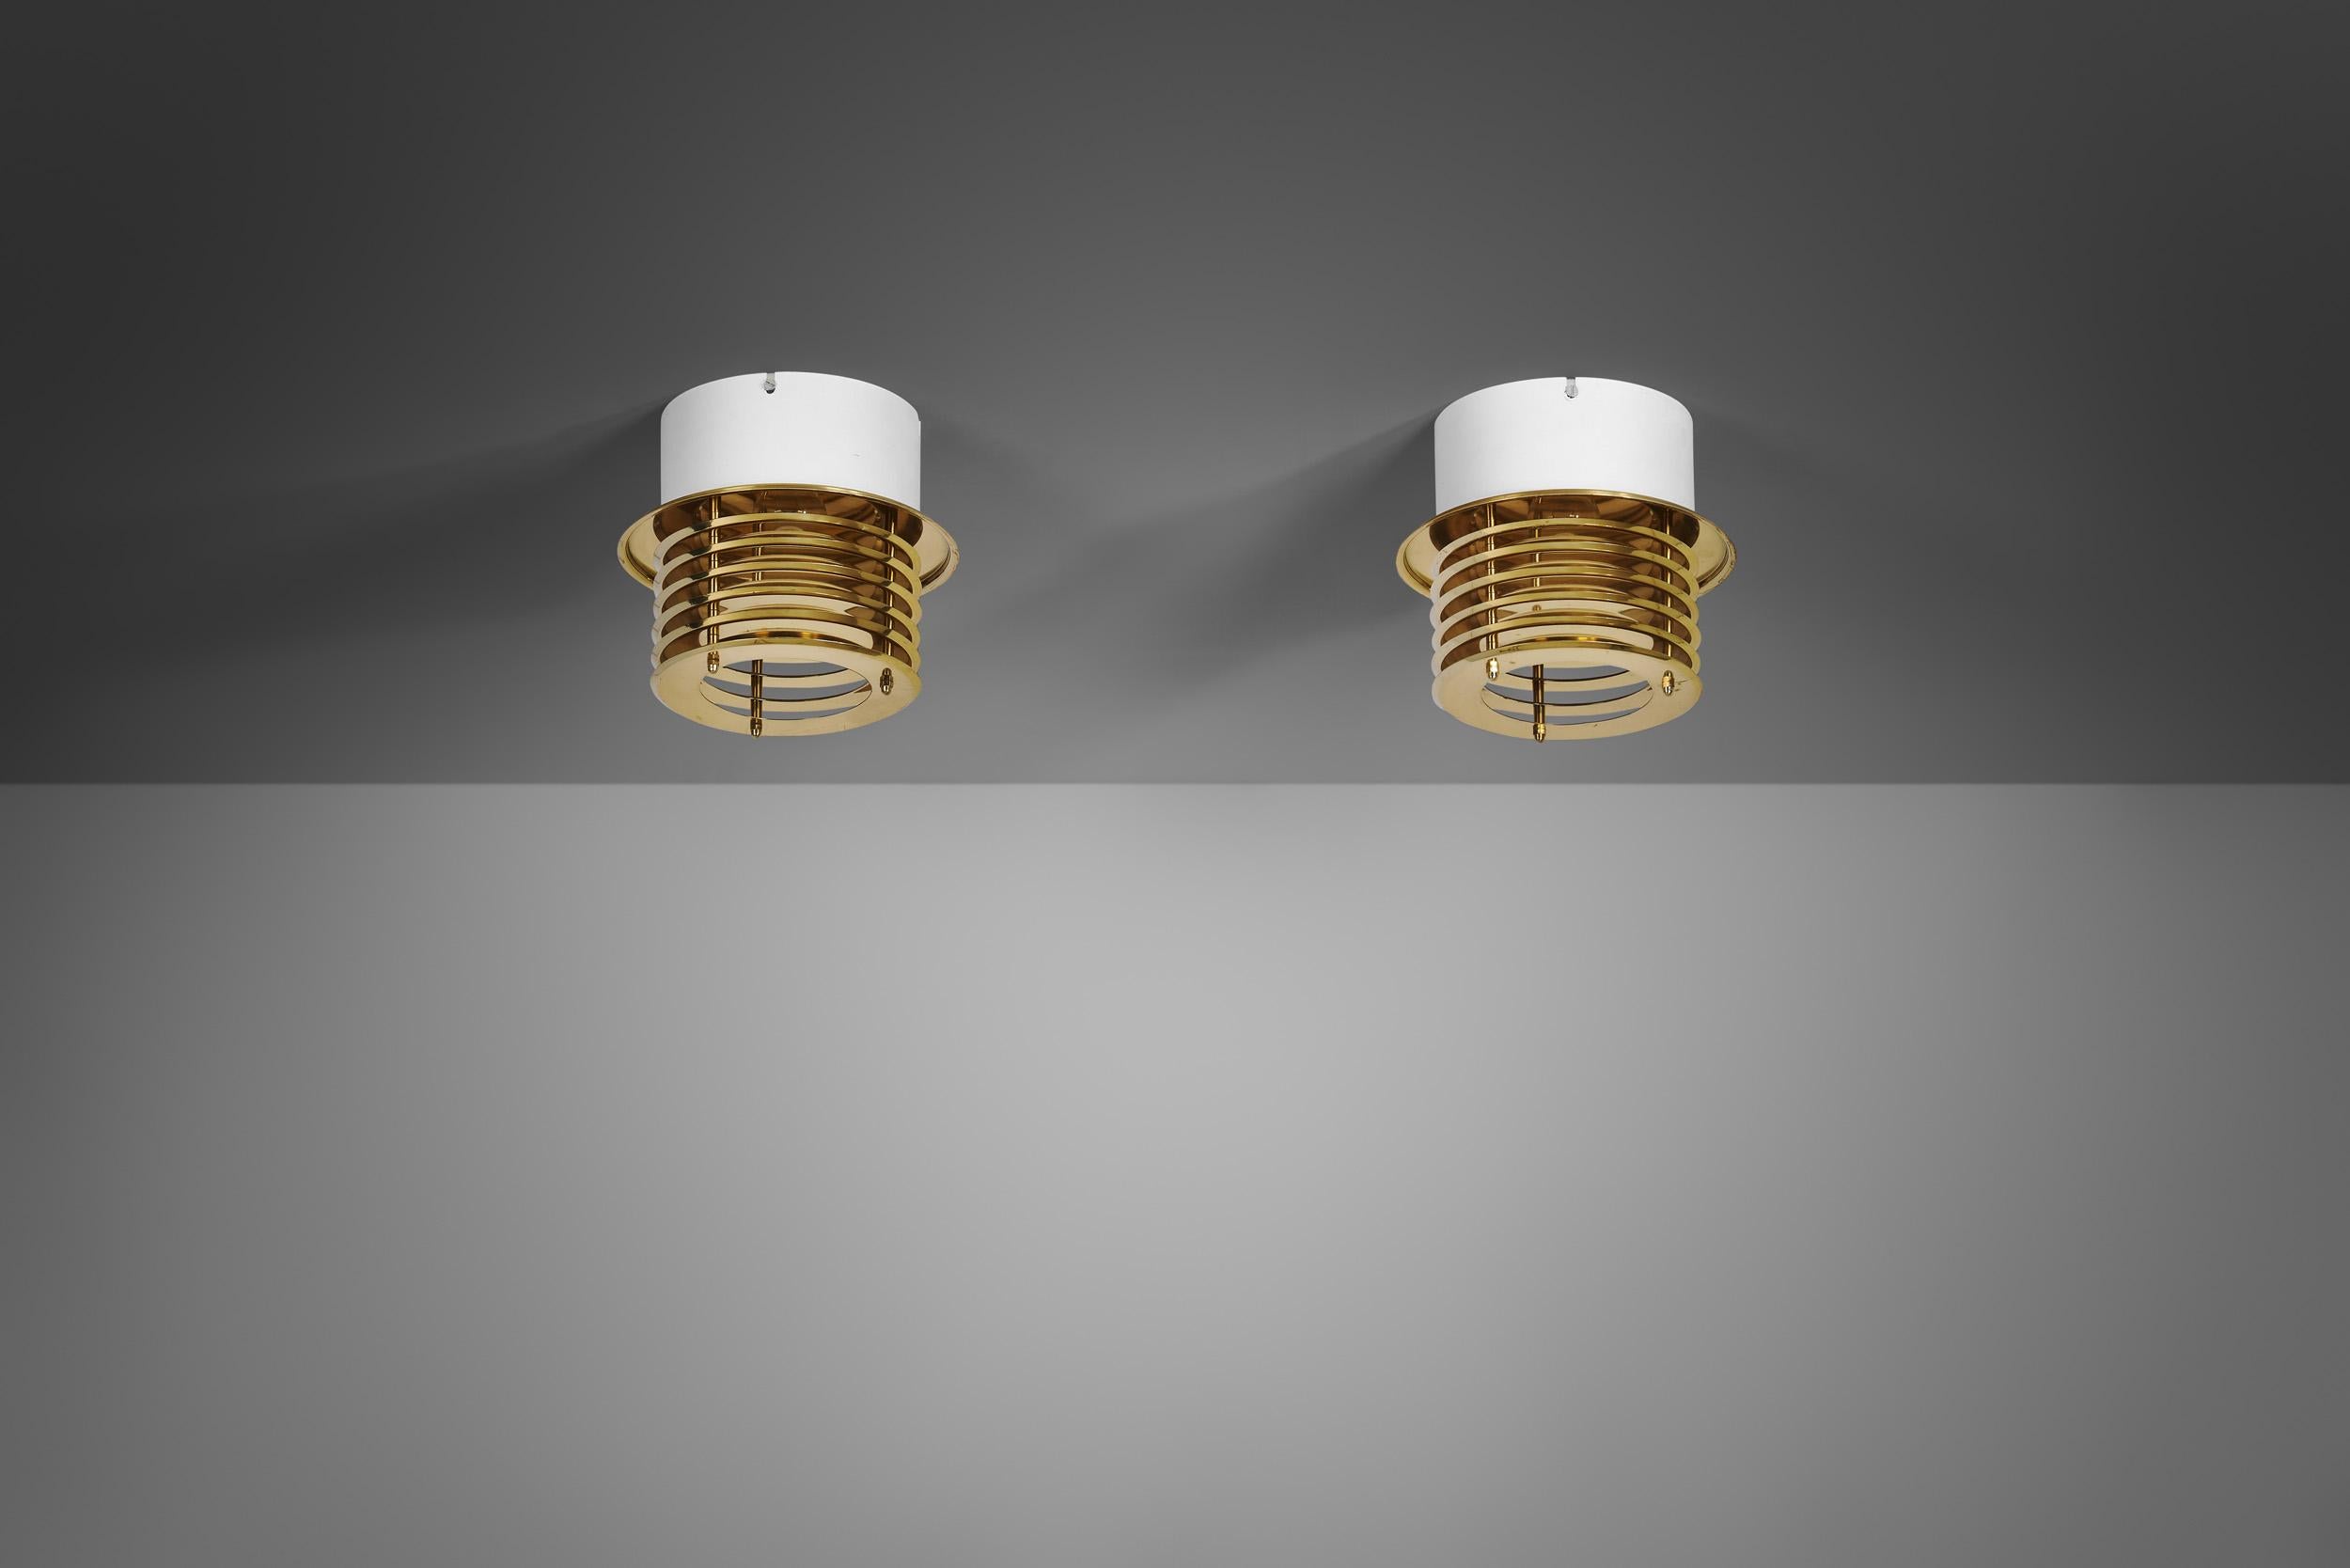 Mid-20th Century Brass and Metal Ceiling Lamps by Taiba-Falkenberg Belysnin, Sweden 1960s